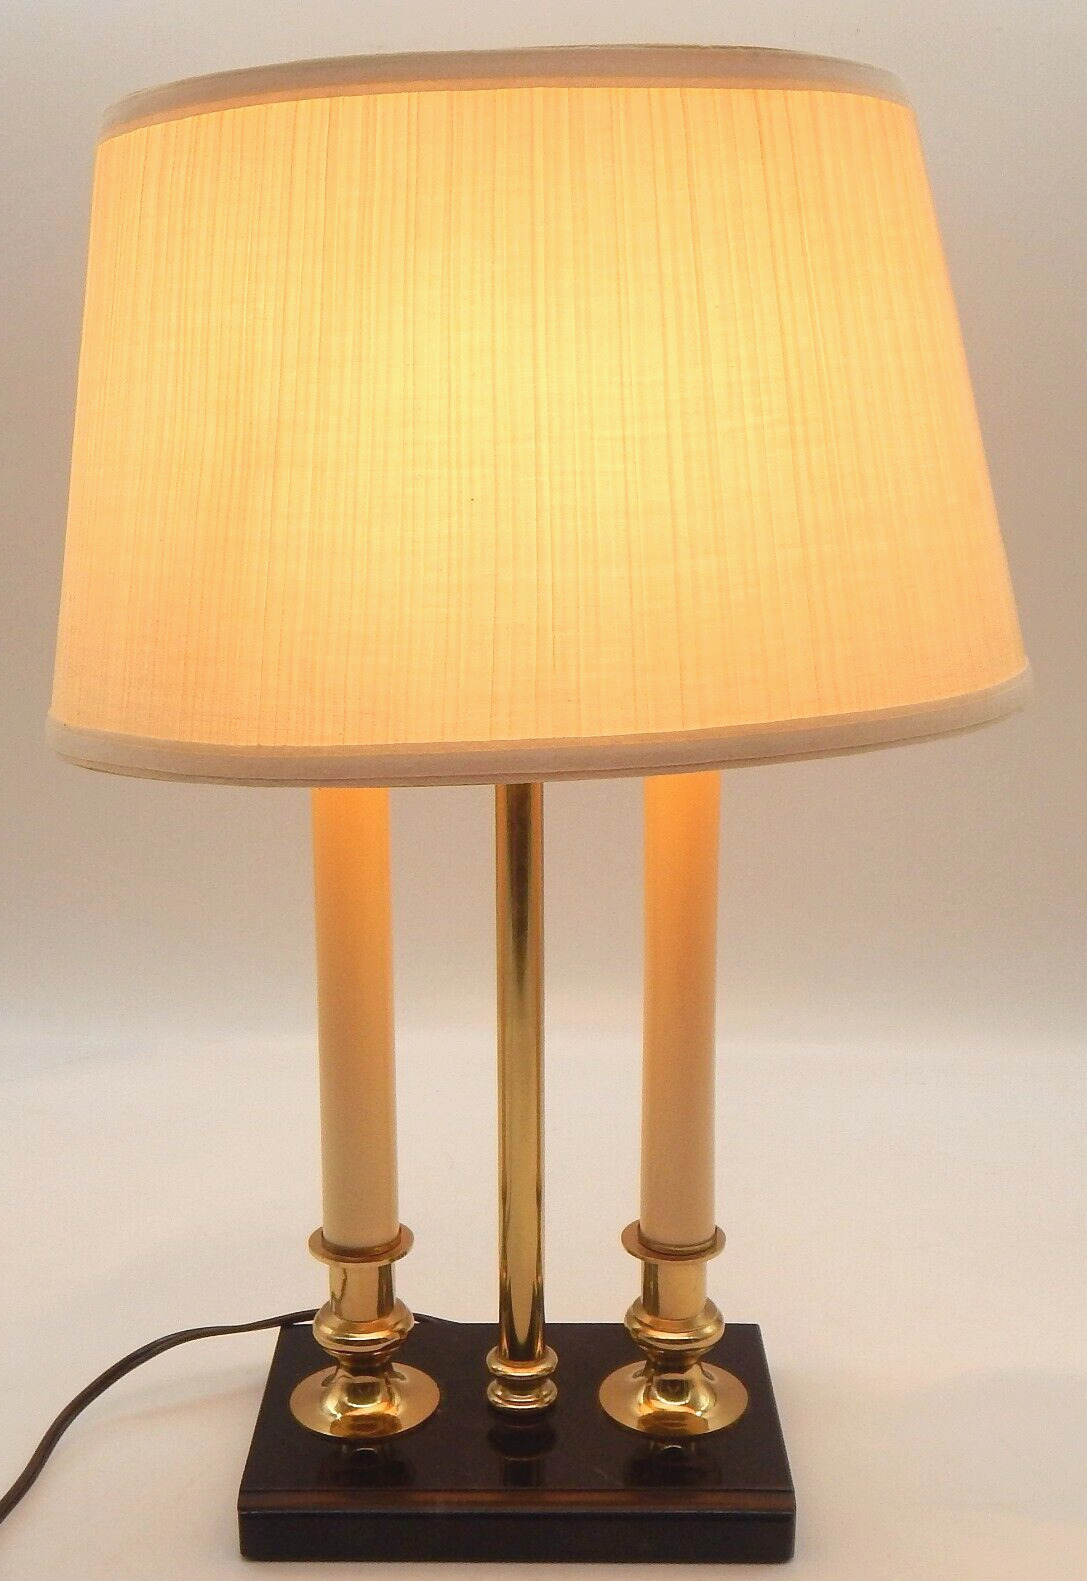 Vintage Bouillotte (1) Candlestick Brass & Black Table Lamp With Pleated Shade